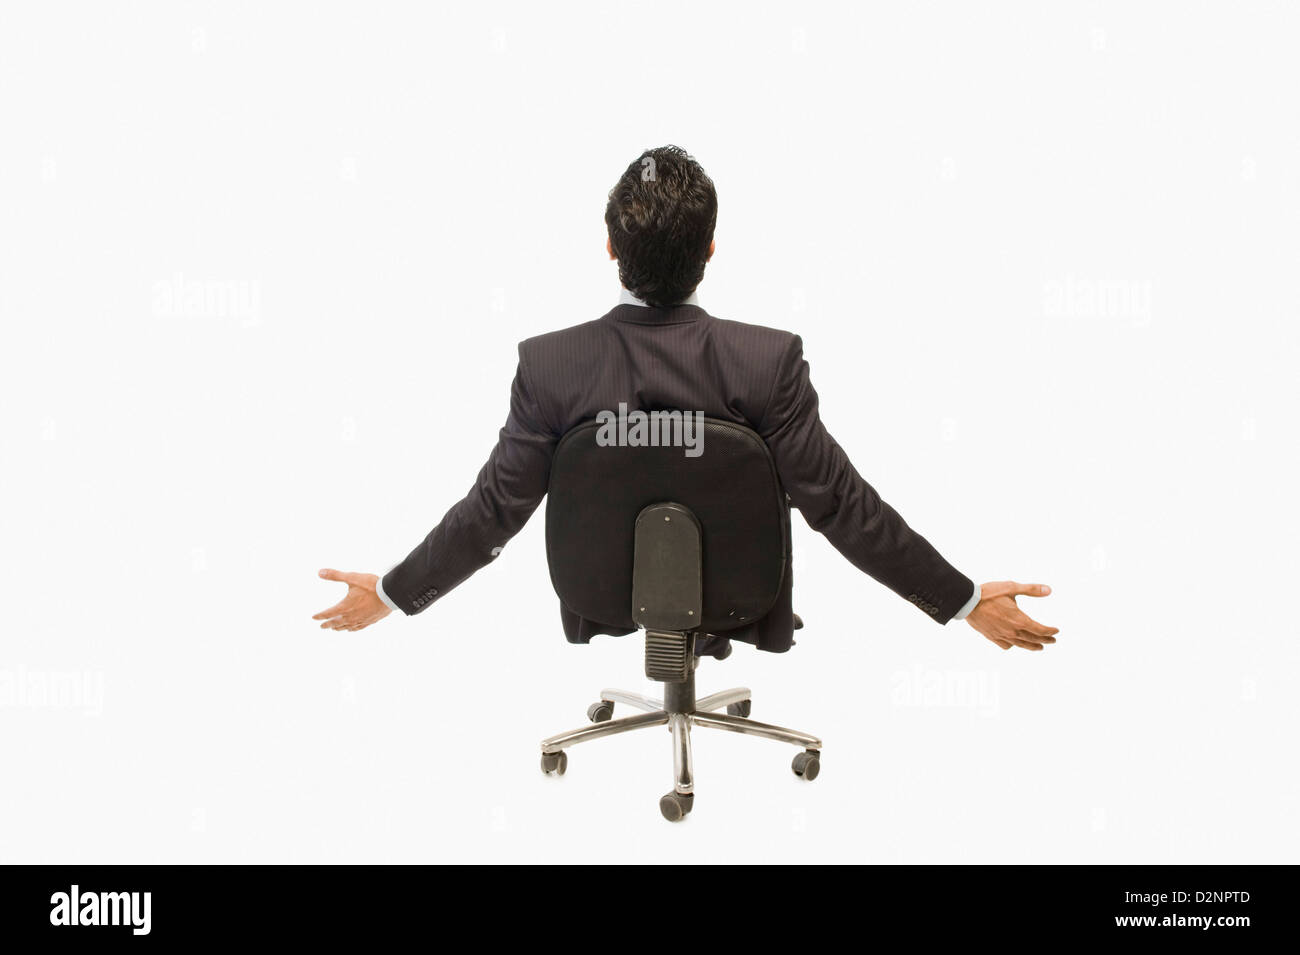 Businessman sitting on a chair with his arm outstretched Stock Photo